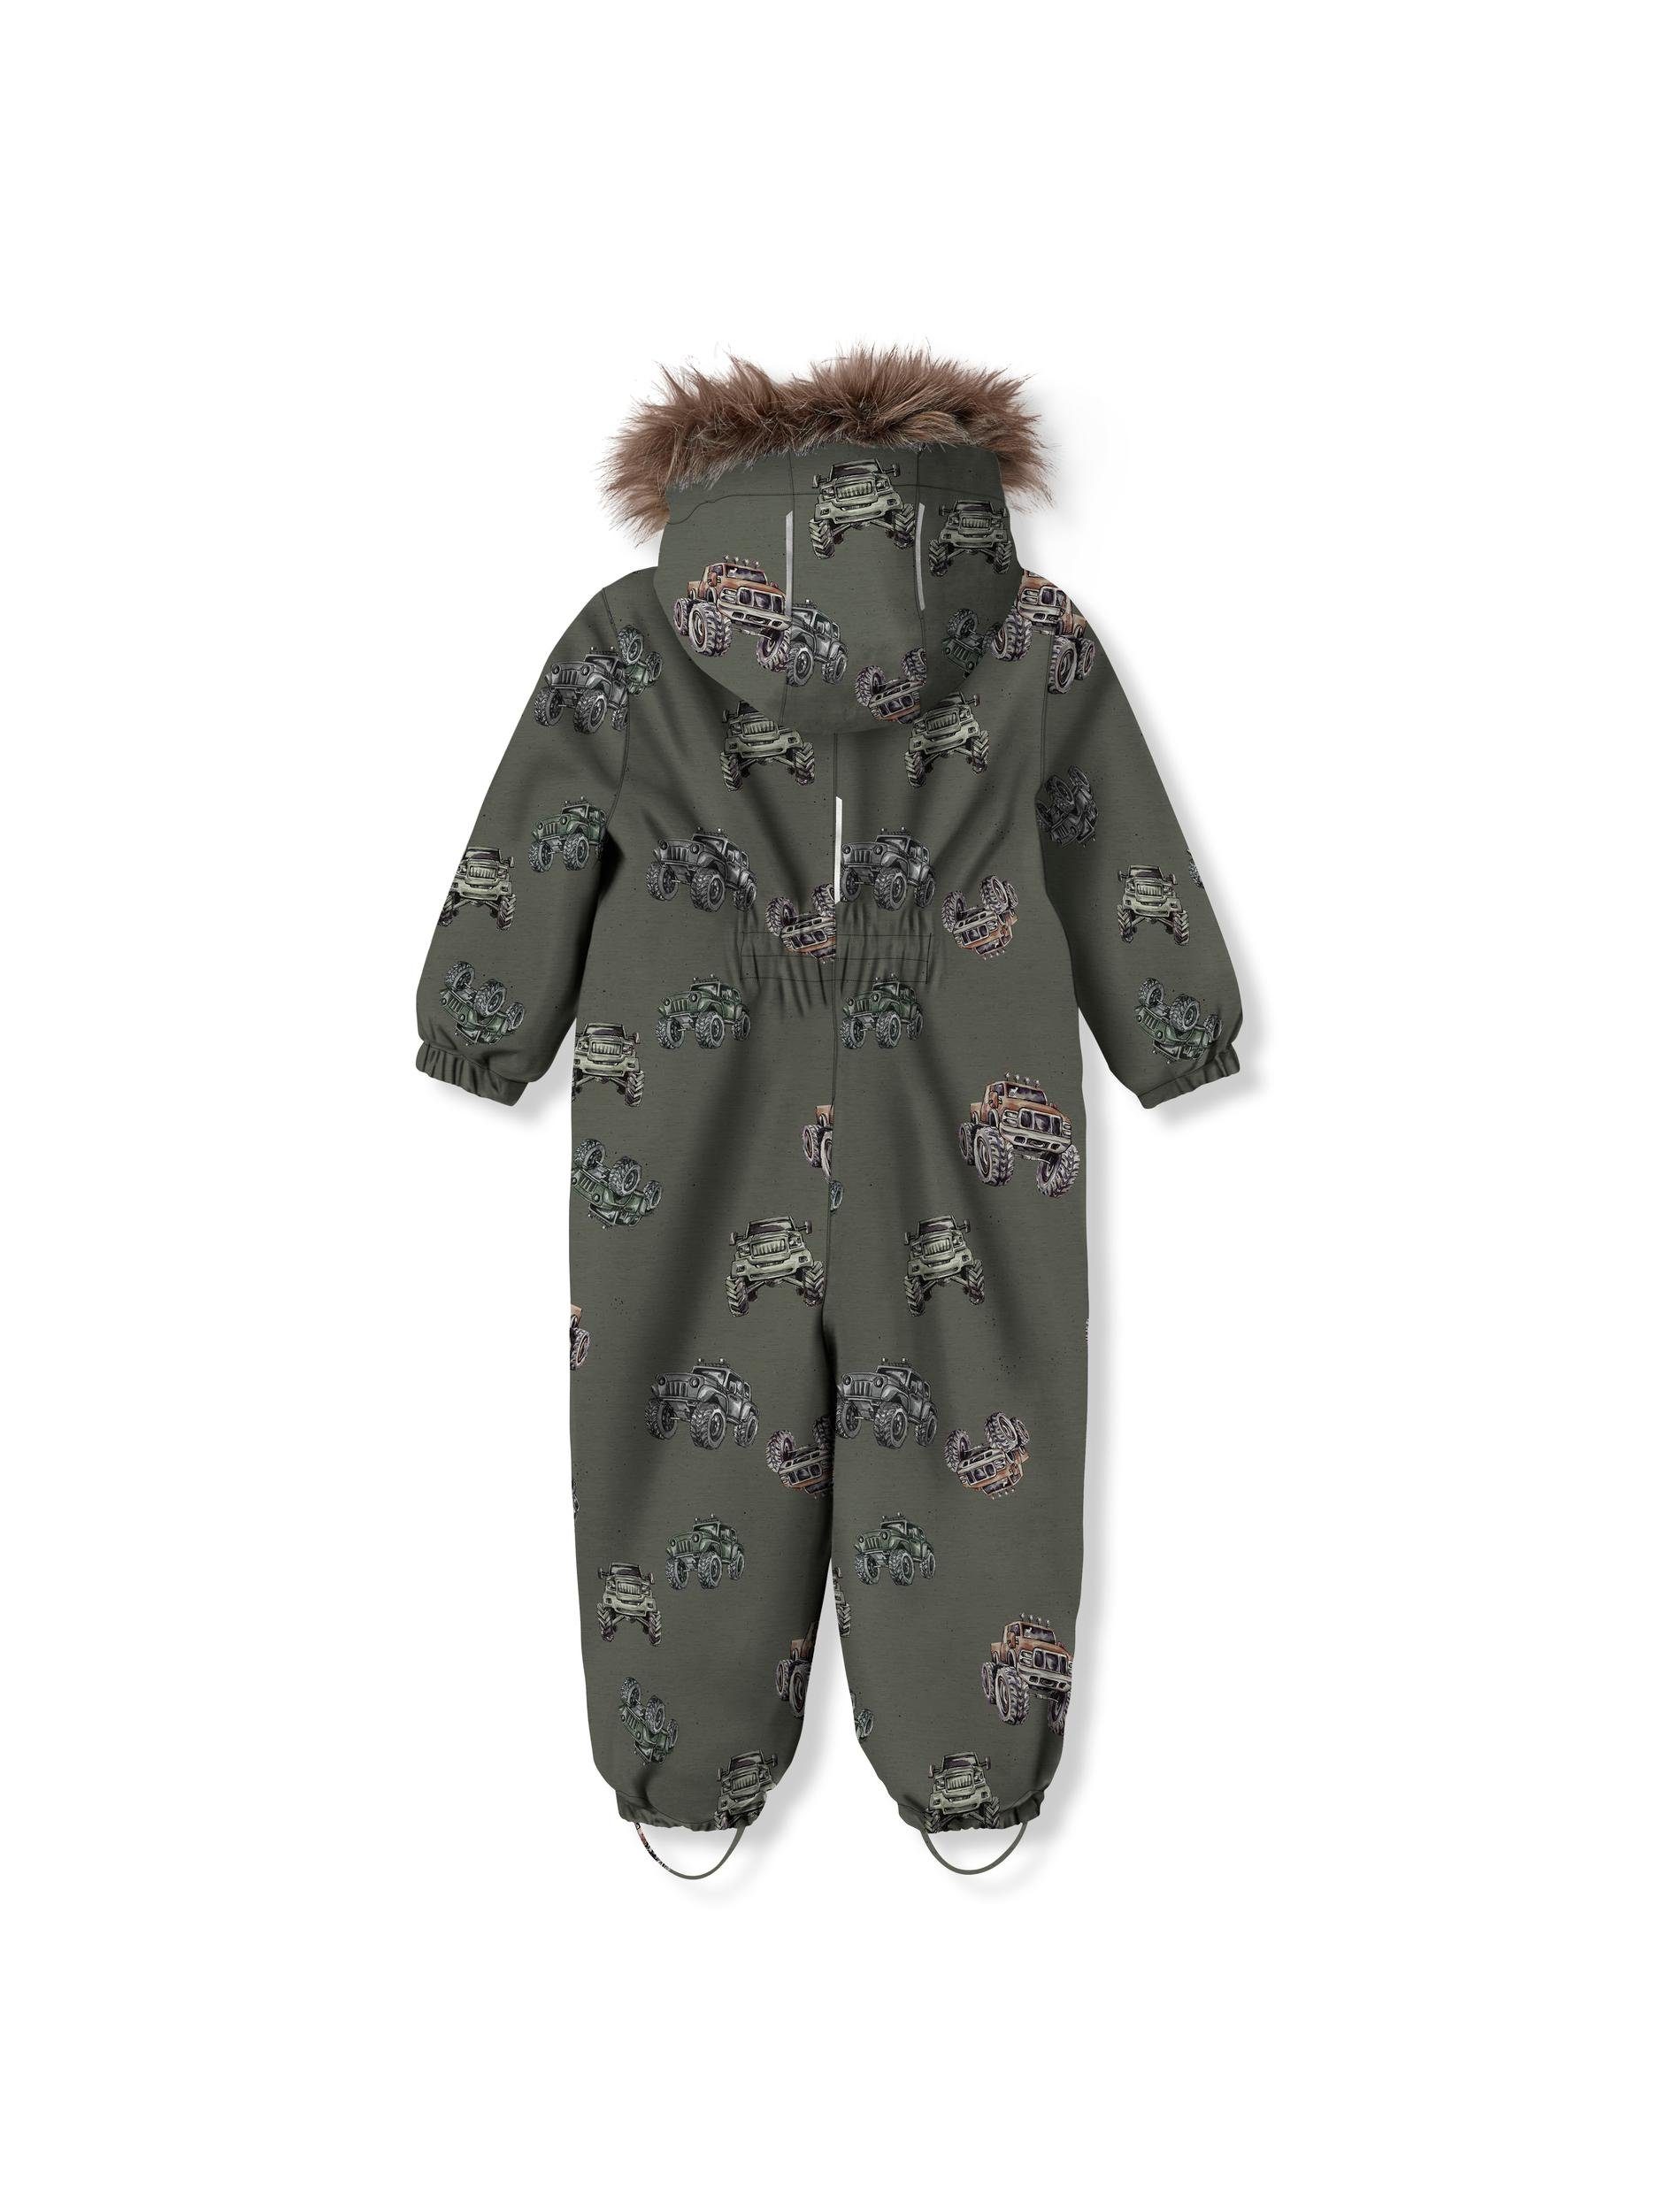 It NMMSNOW10 SUIT Schneeoverall TRUCK Name FO